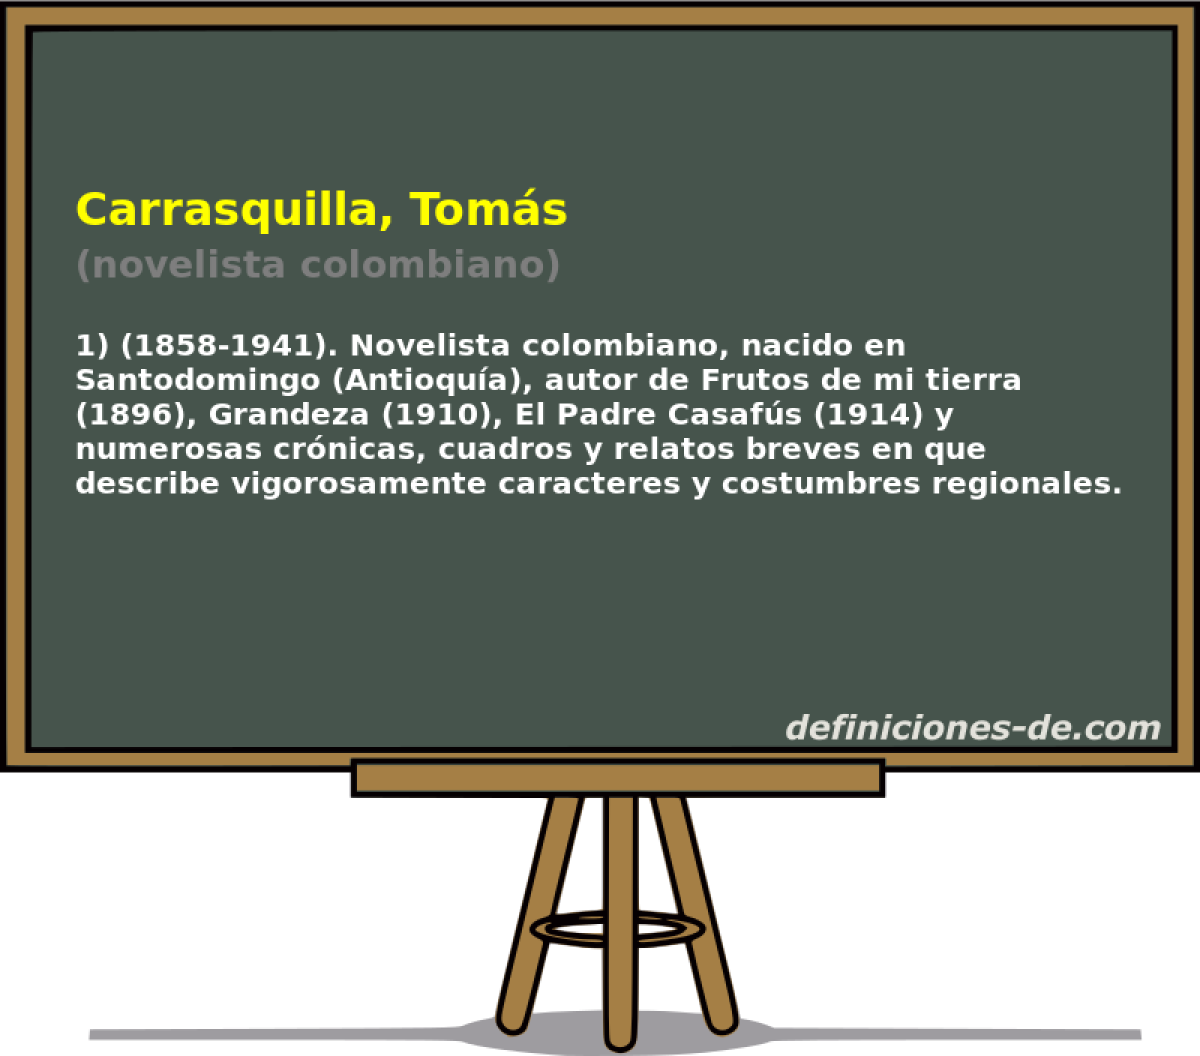 Carrasquilla, Toms (novelista colombiano)